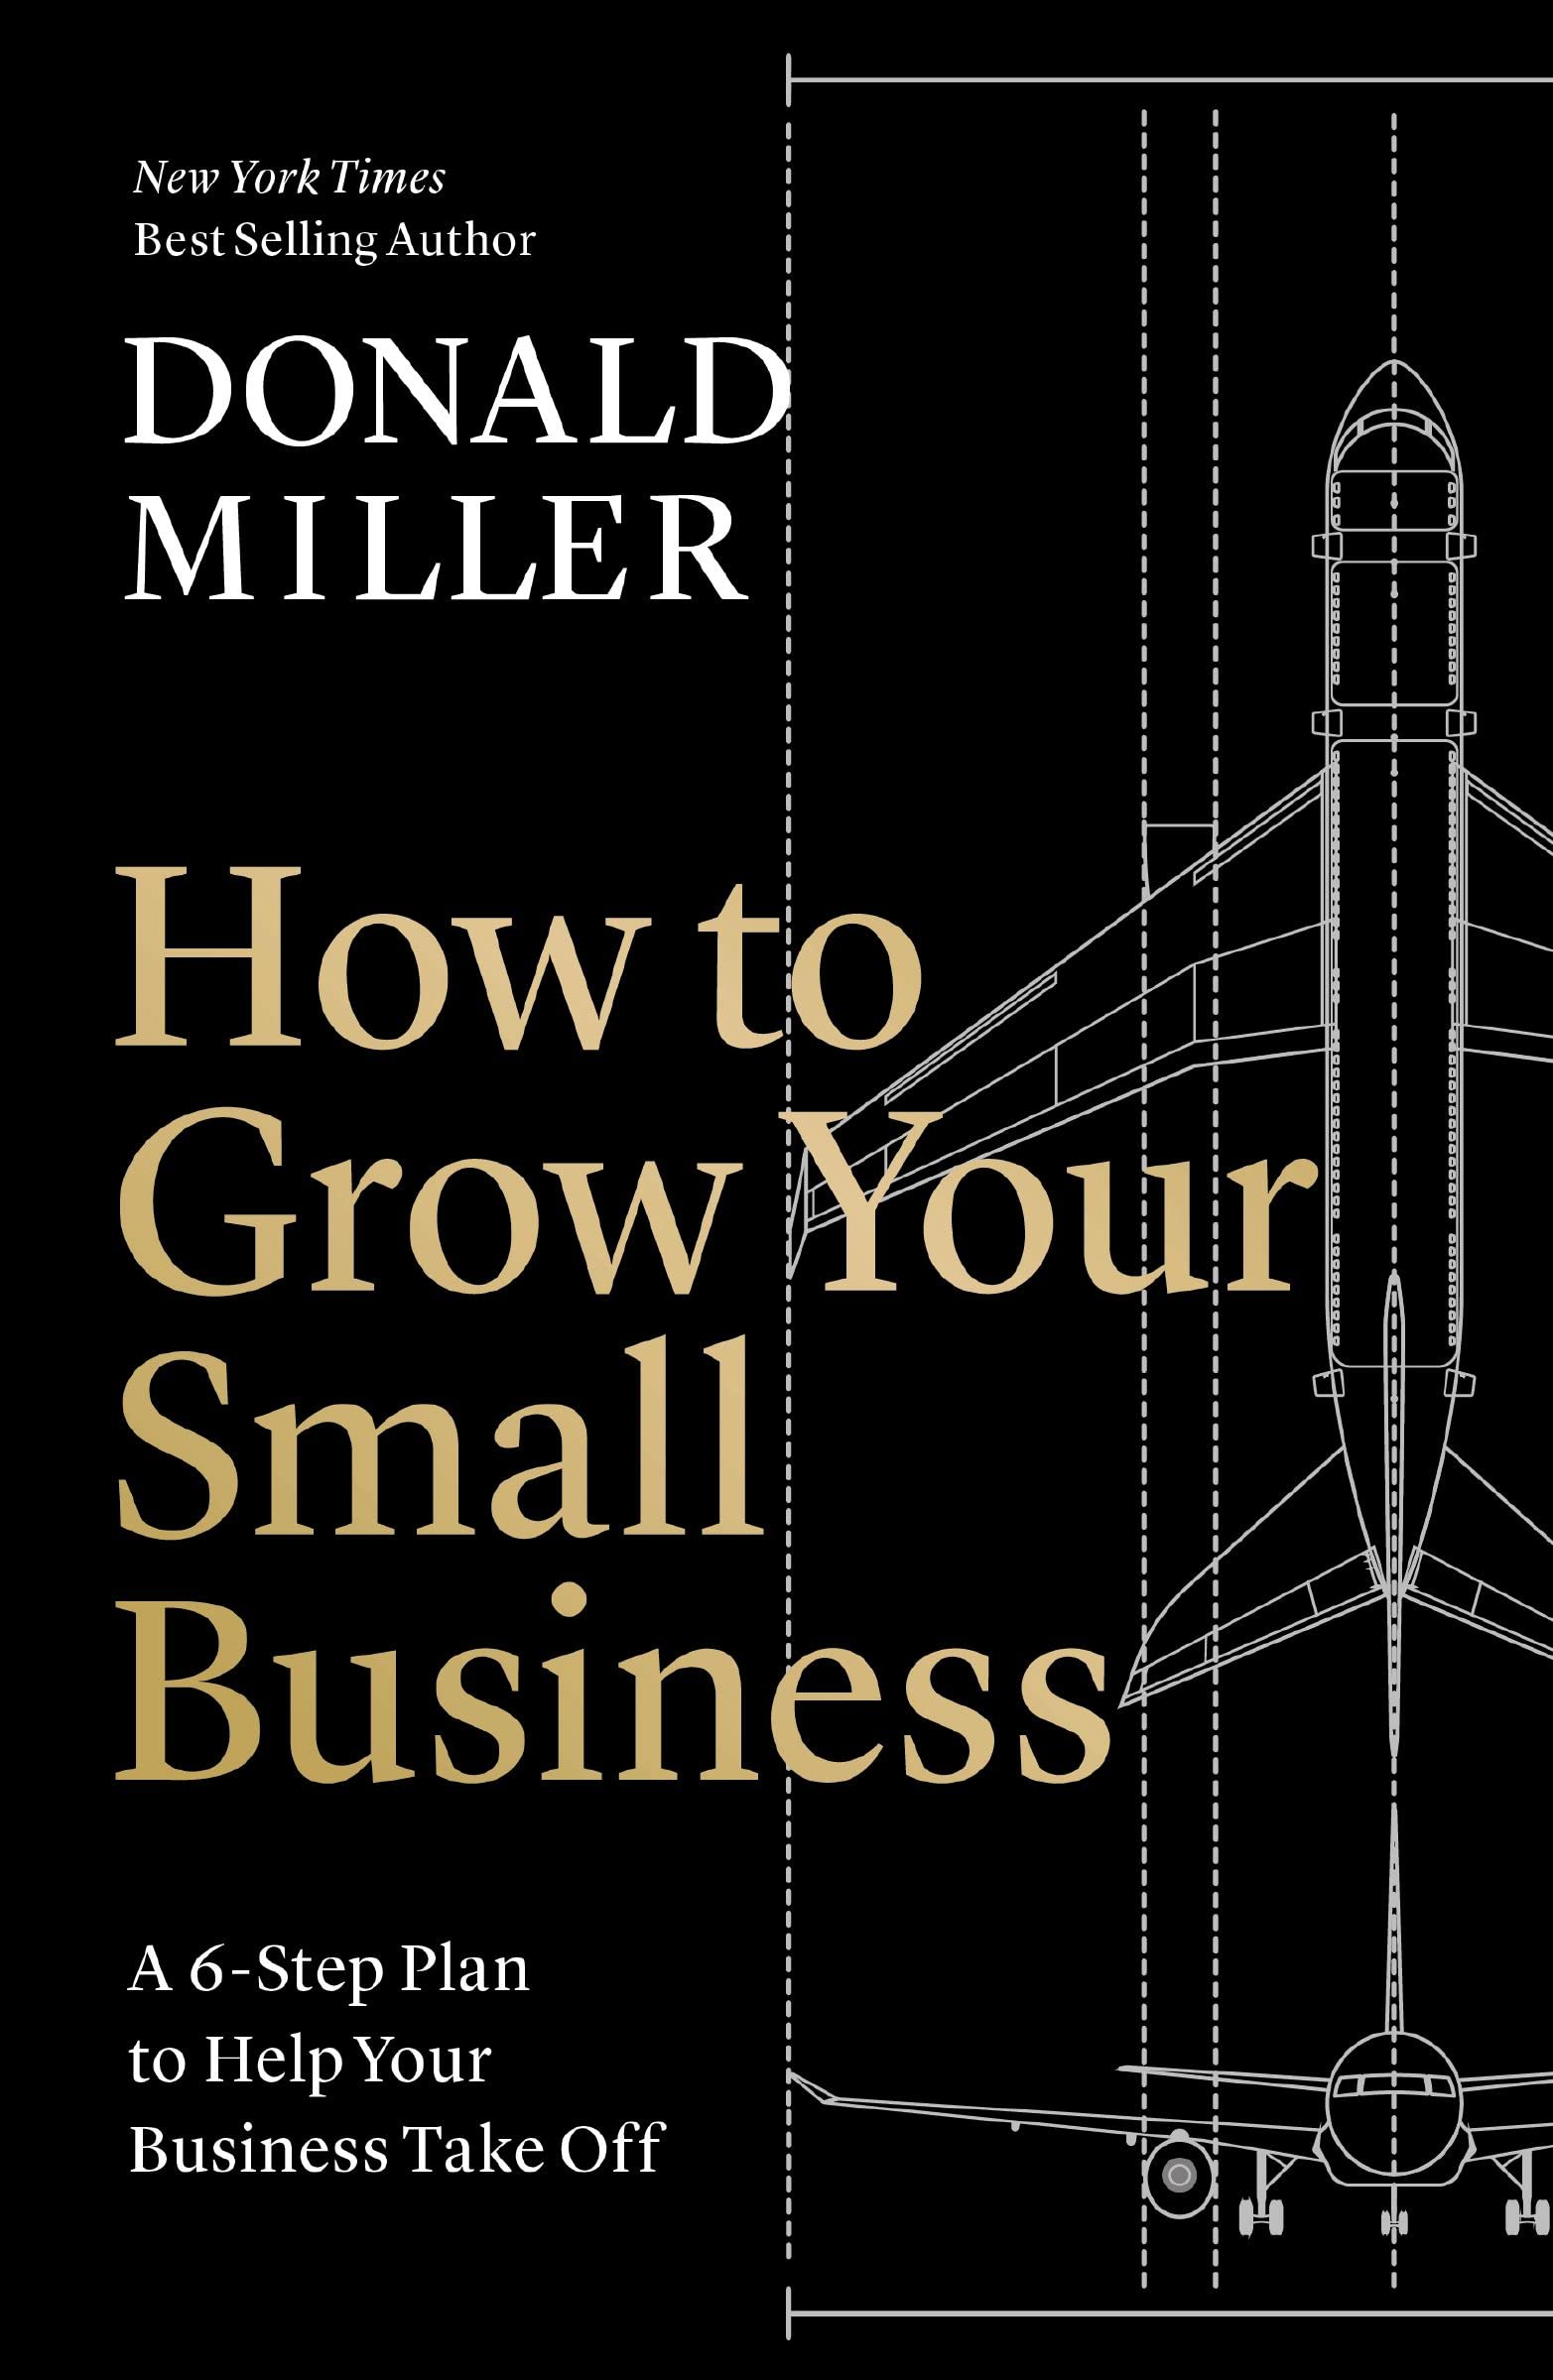 How to Grow Your Small Business, by Donald Miller 